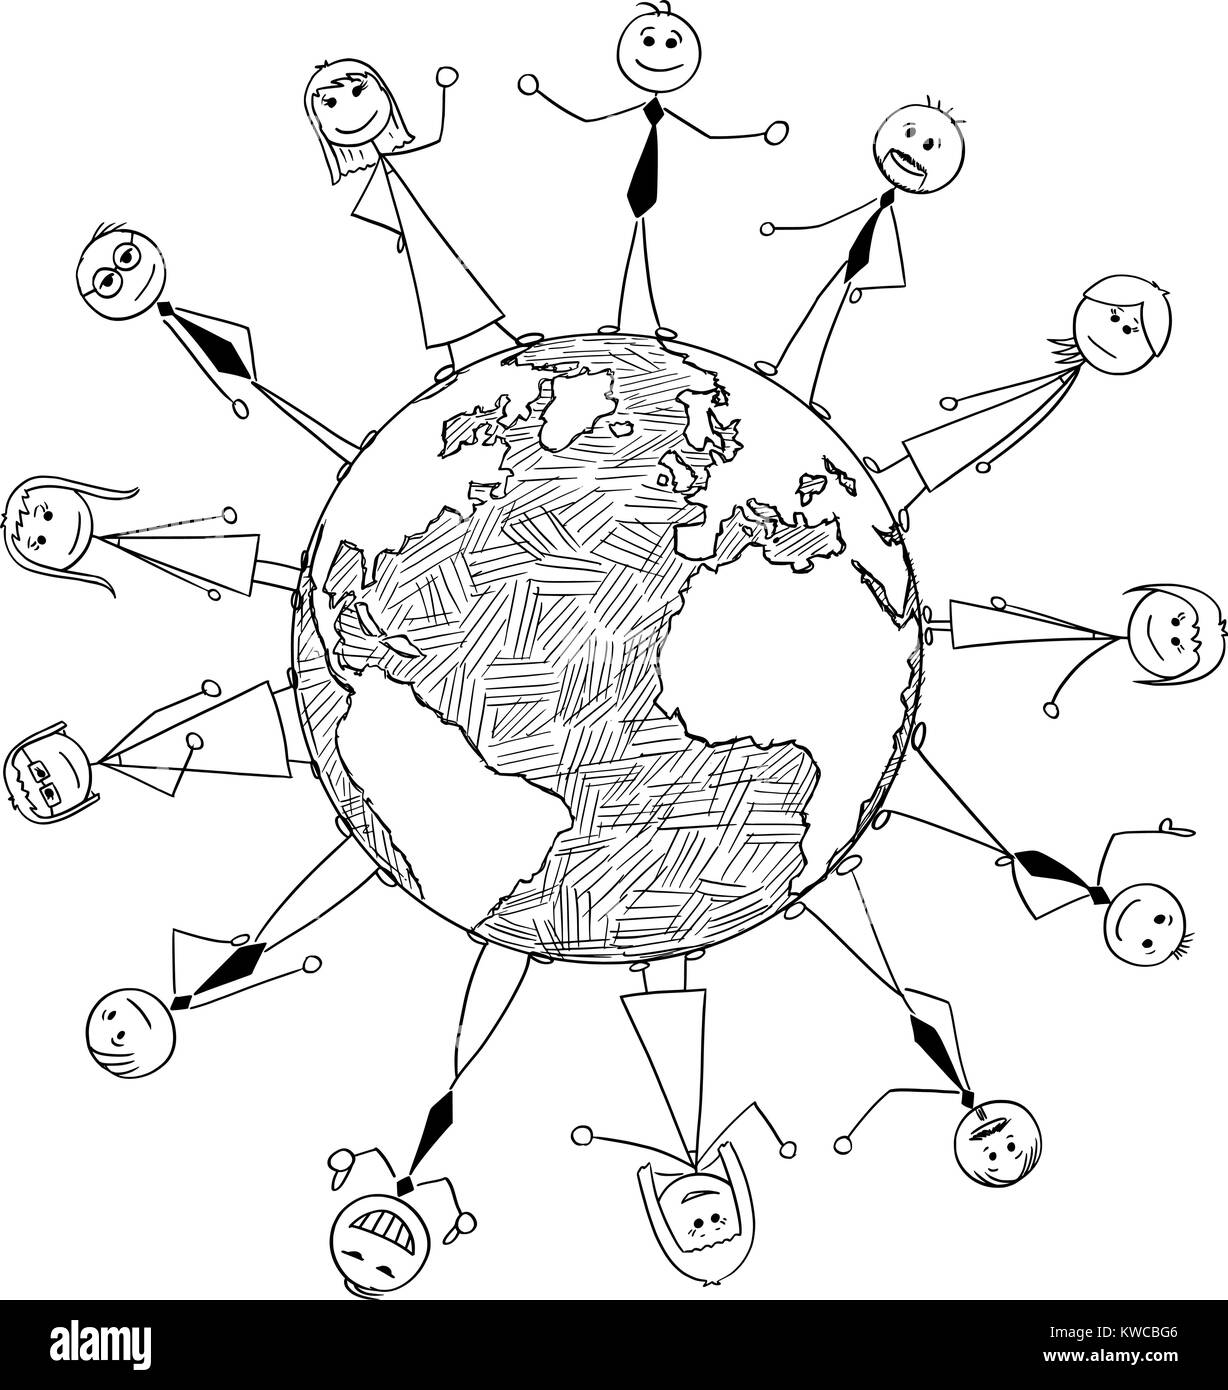 Cartoon stick man drawing conceptual illustration of international cooperation of business people standing around the planet Earth world globe. Stock Vector